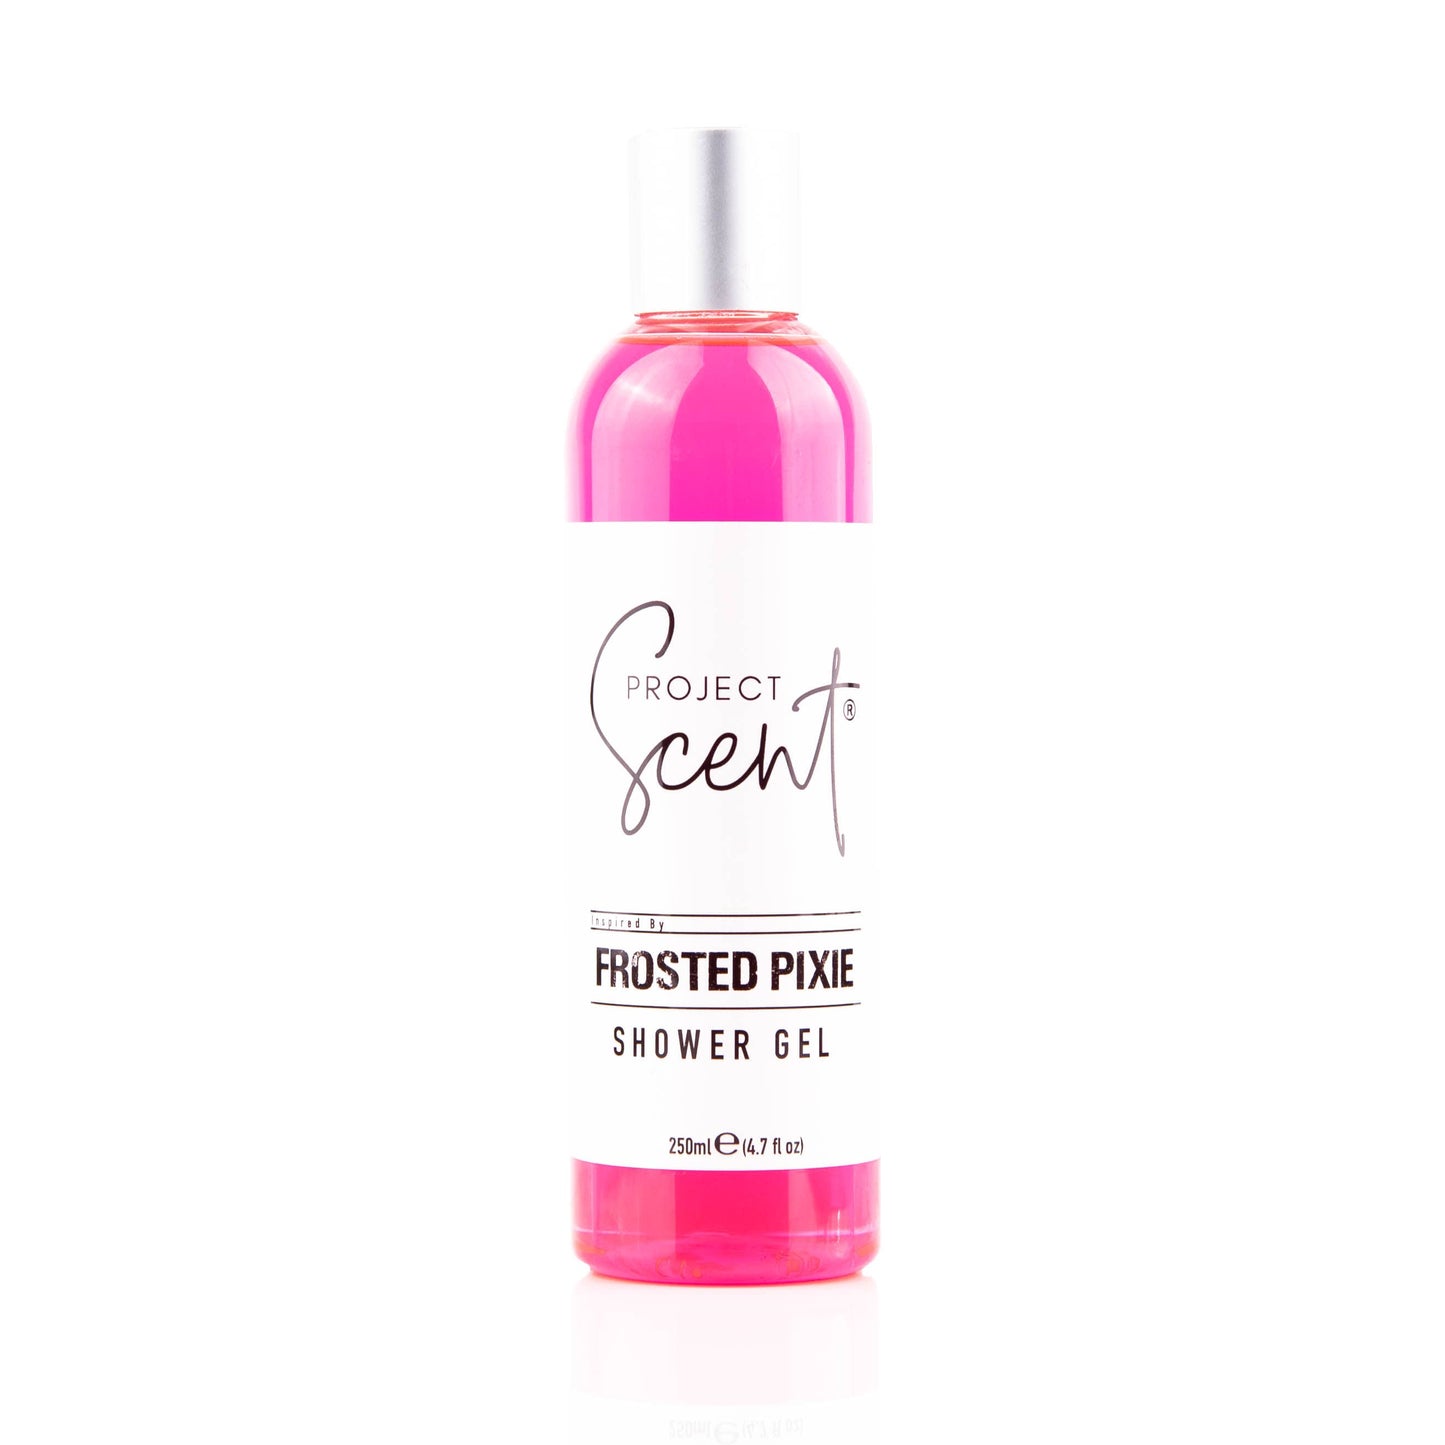 Project Scent Frosted Pixie Shower Gel 150ml & 250ml